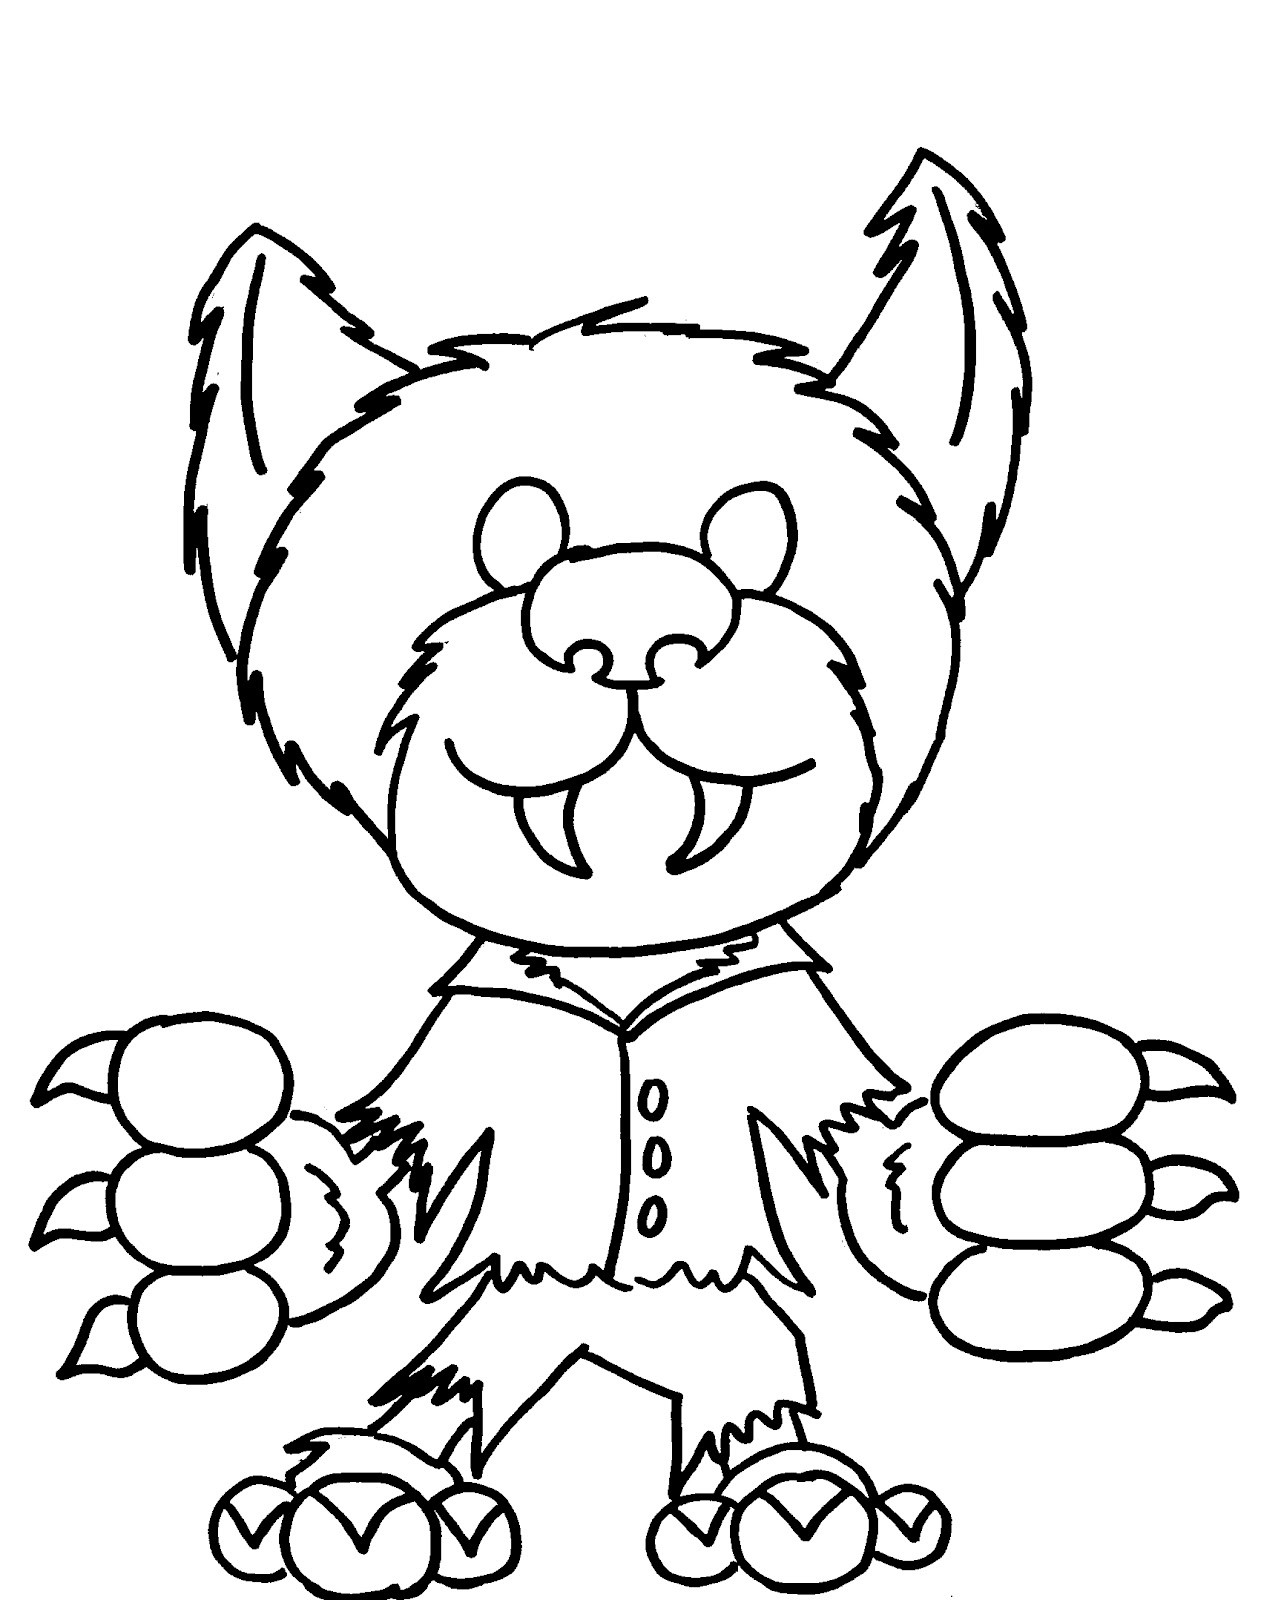 Cute Halloween Coloring Pages For Kids
 50 Free Printable Halloween Coloring Pages For Kids